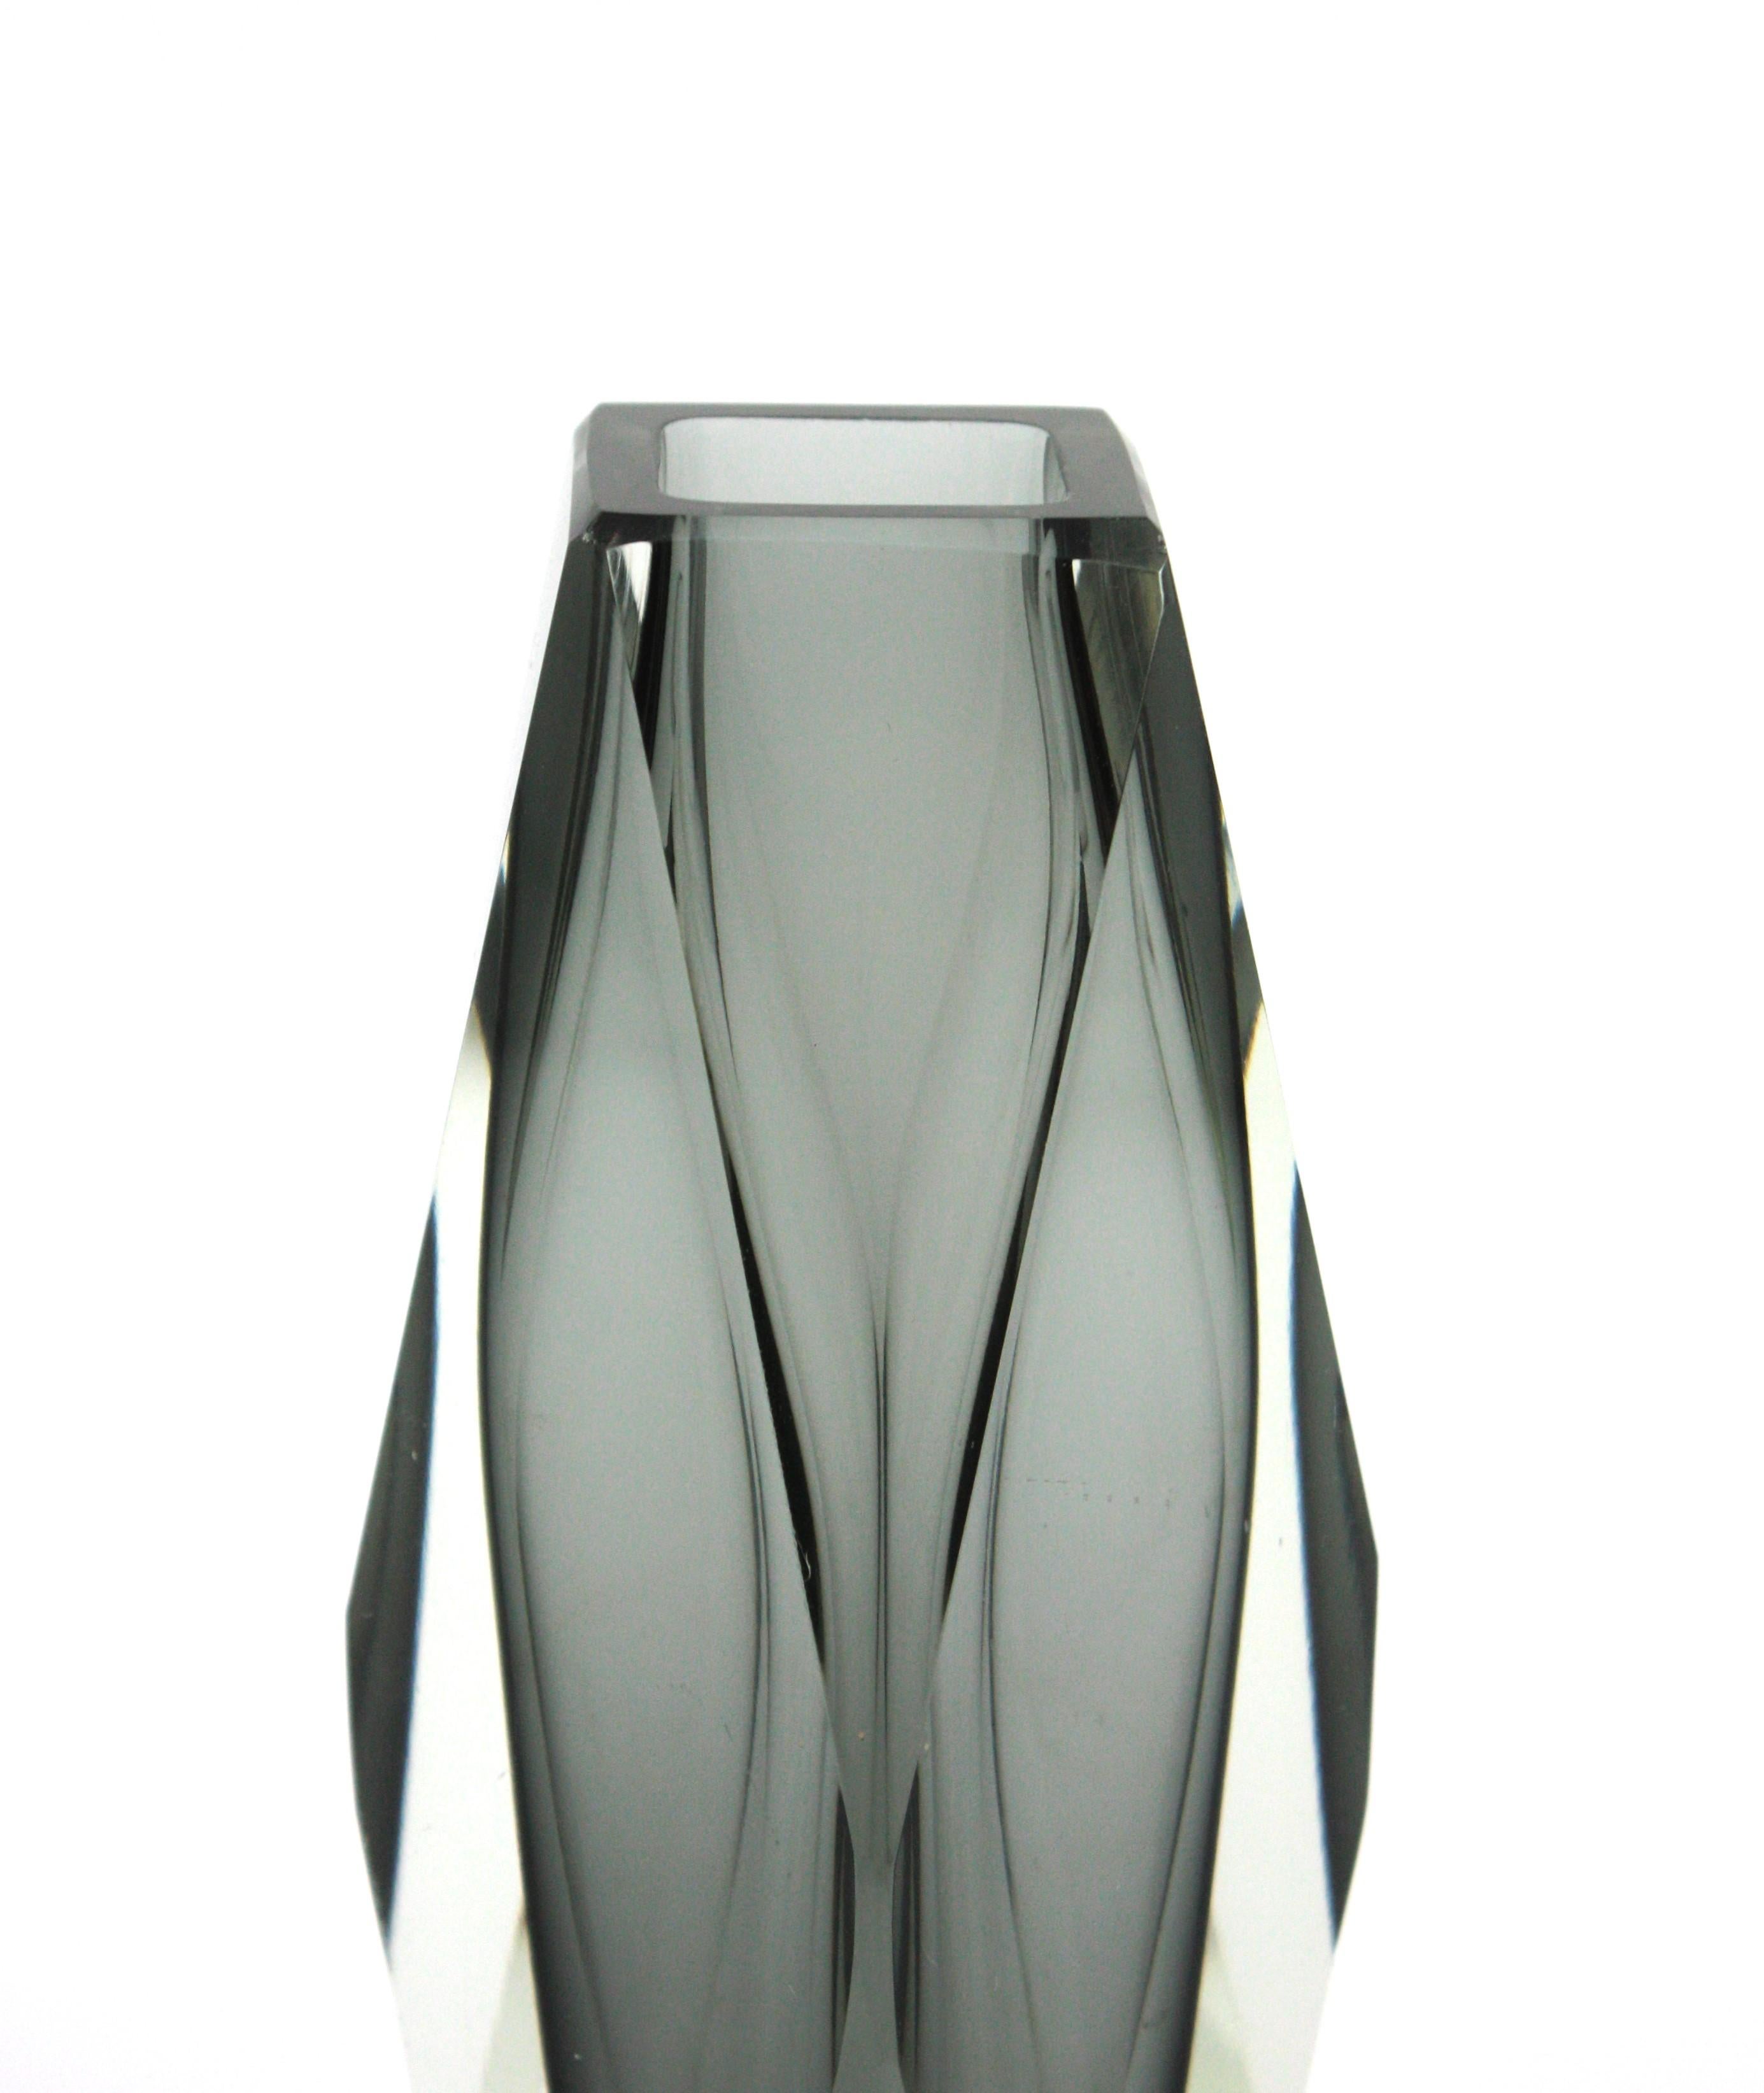 Mandruzzato Murano Sommerso Smoked Grey Clear Faceted Art Glass Vase For Sale 5